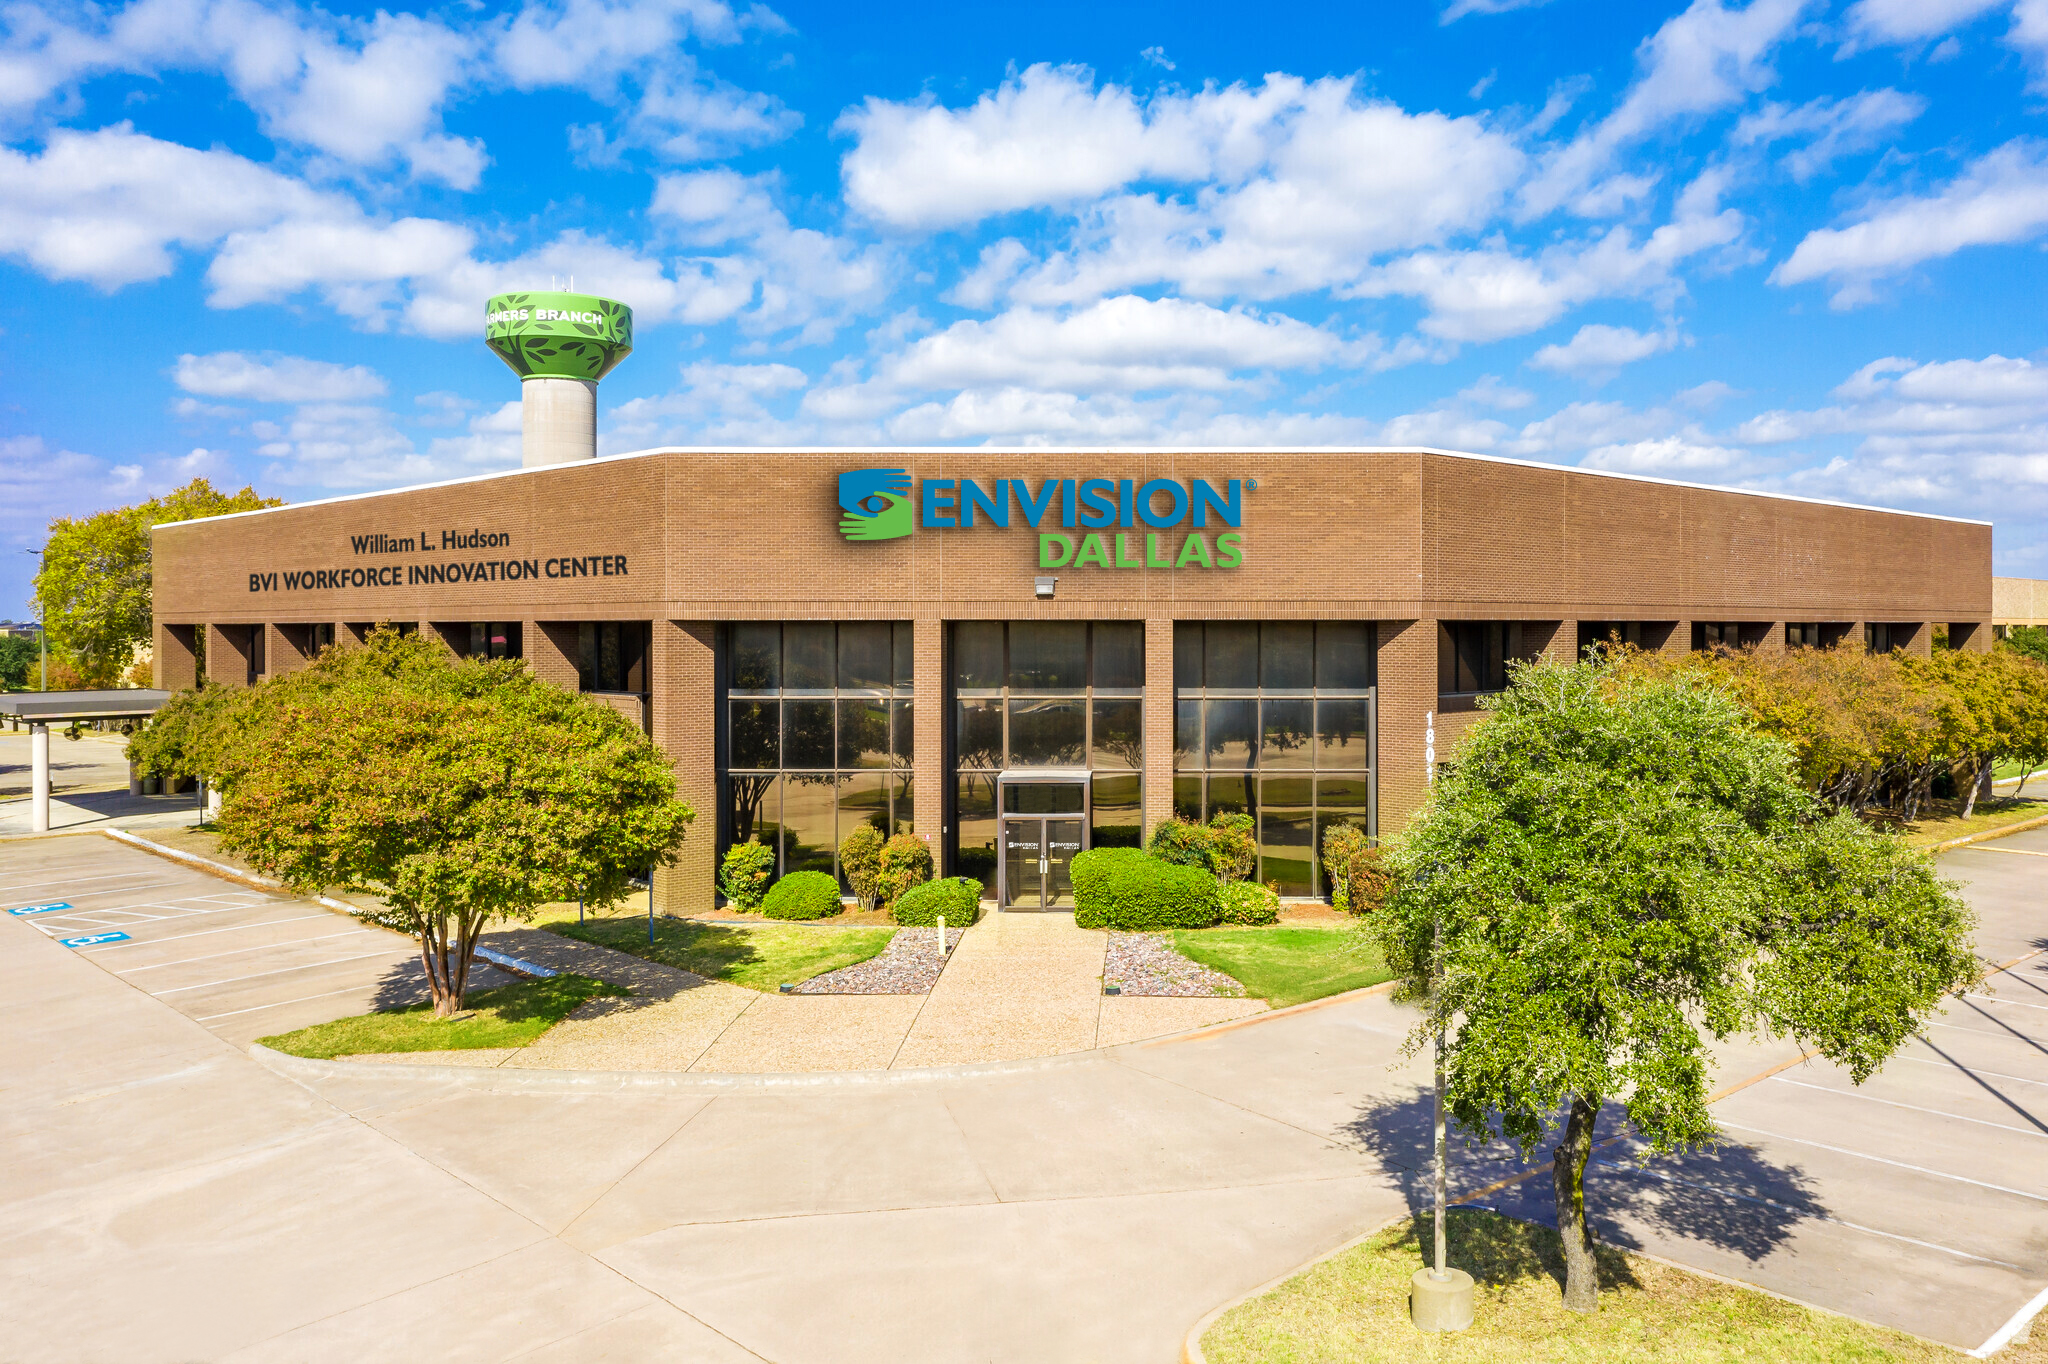 Artist rendering of the new Envision Dallas building in Farmers Branch